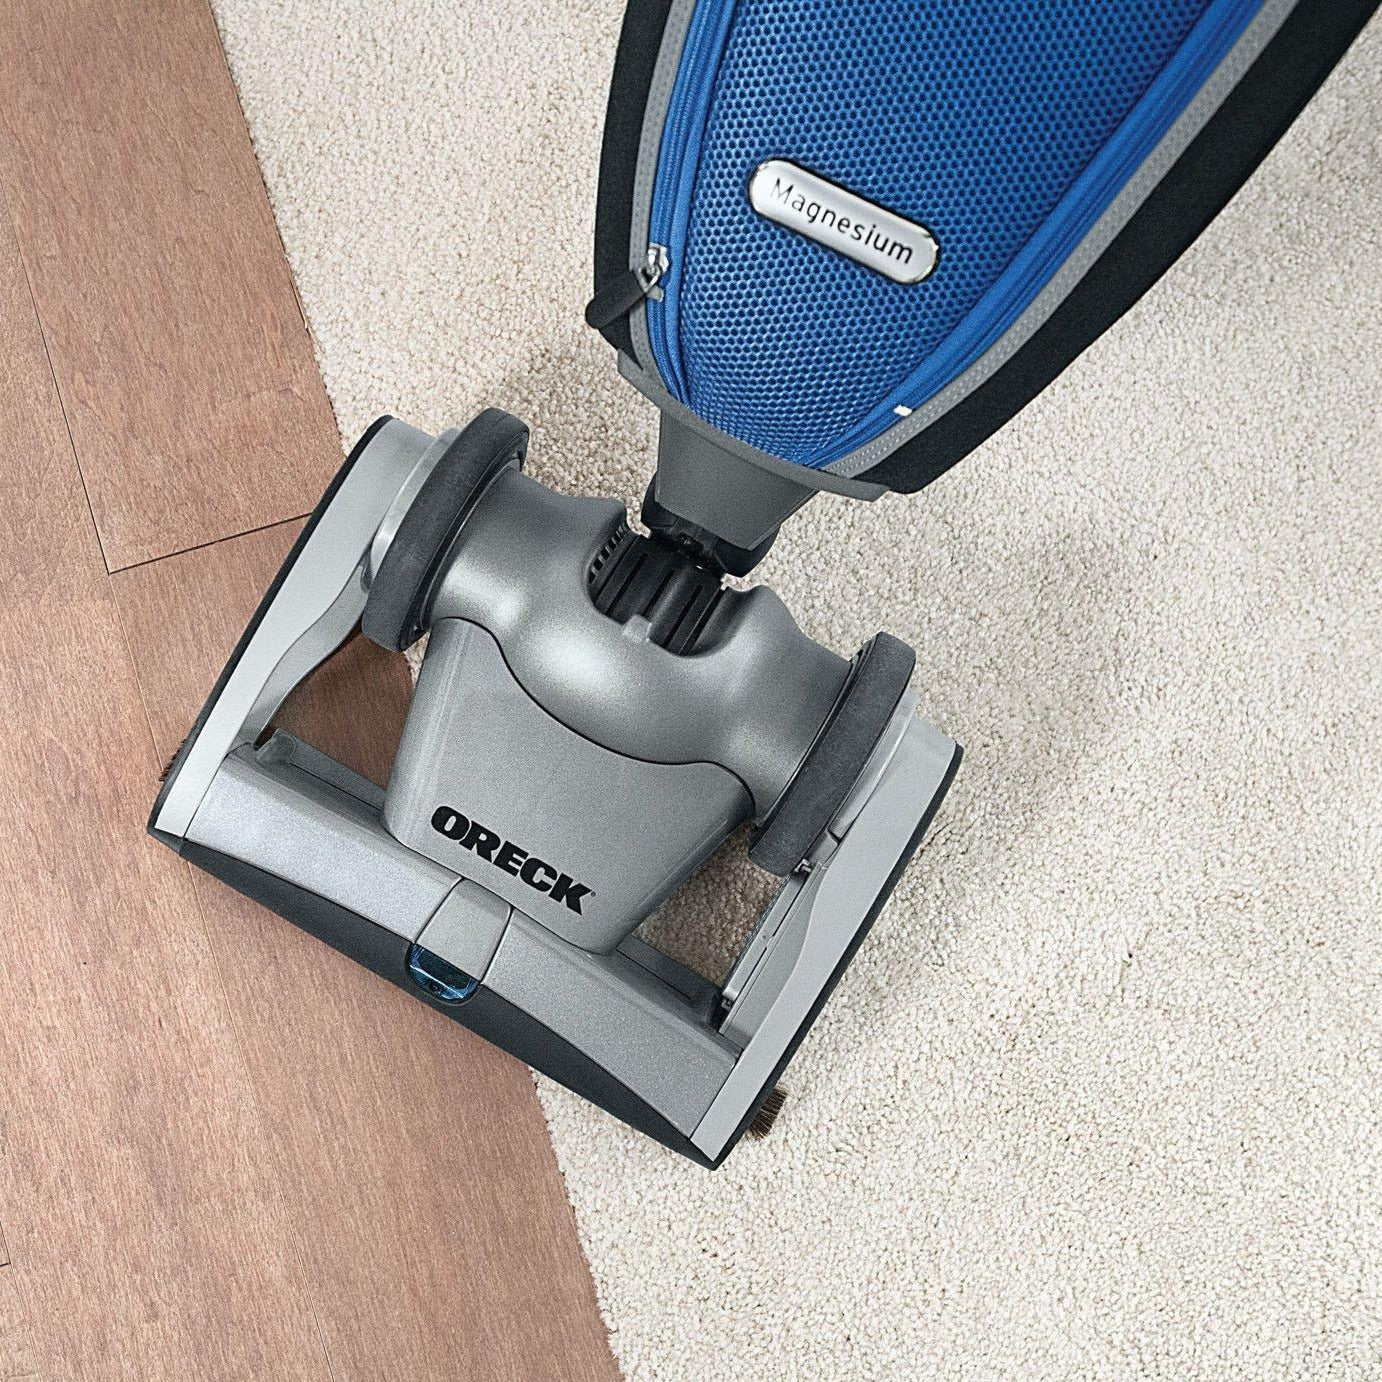 Oreck's ultra lightweight and maneuverable vacuum